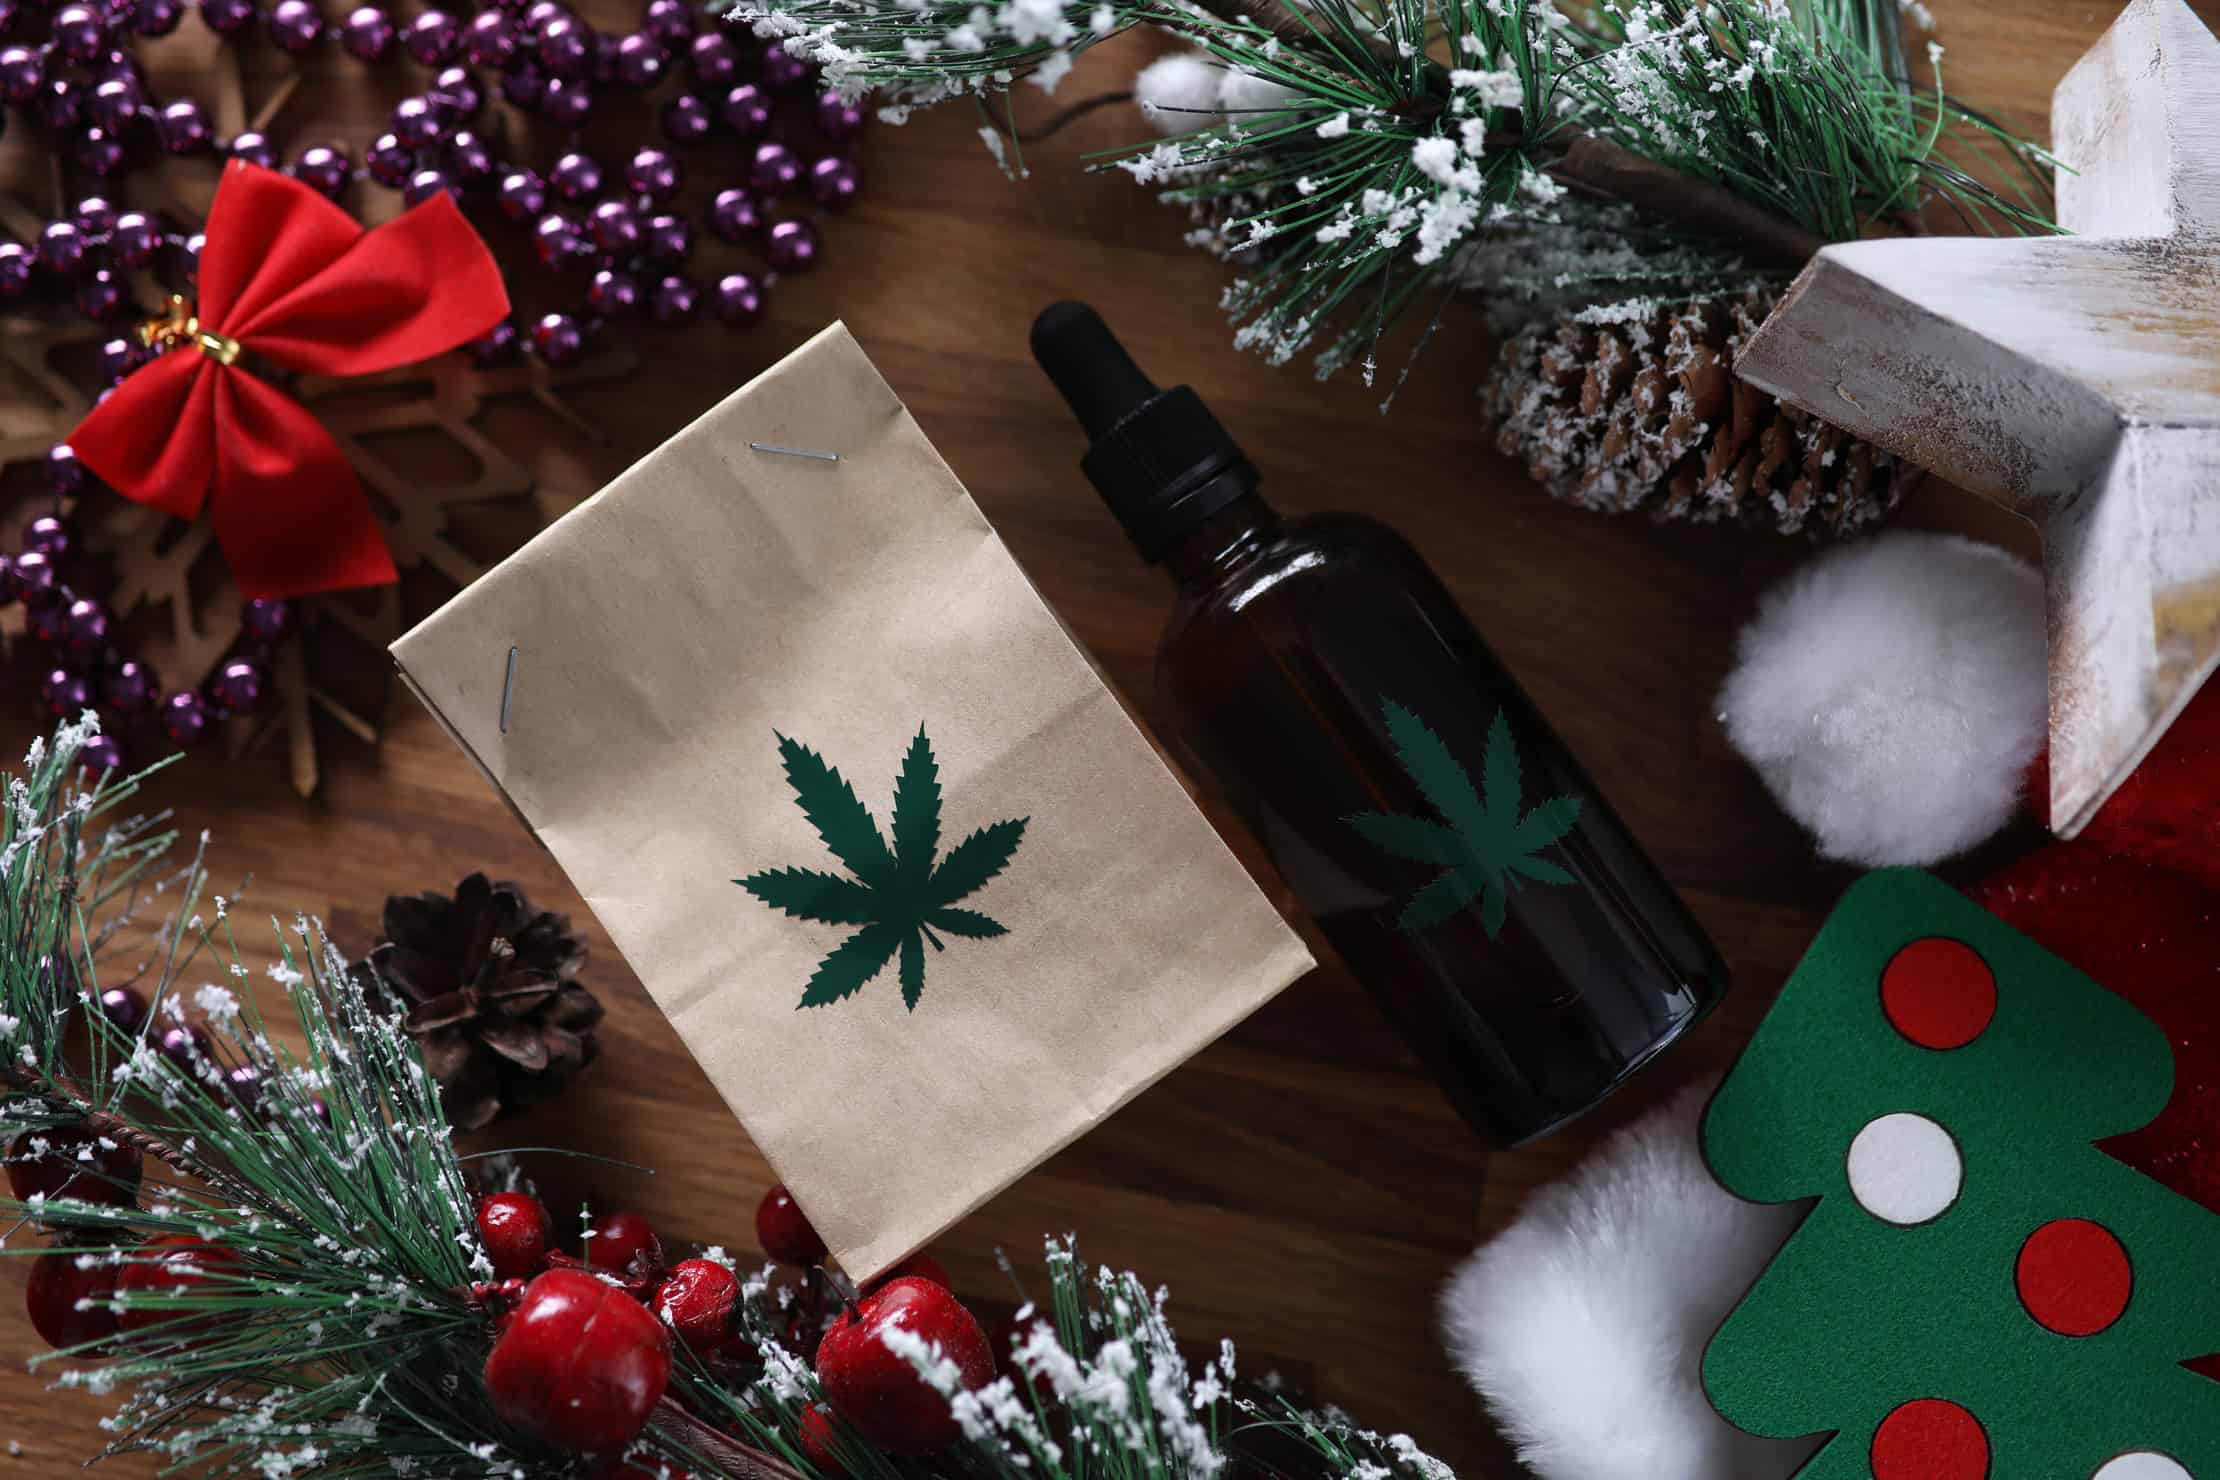 The best marijuana Christmas gifts for 2019.